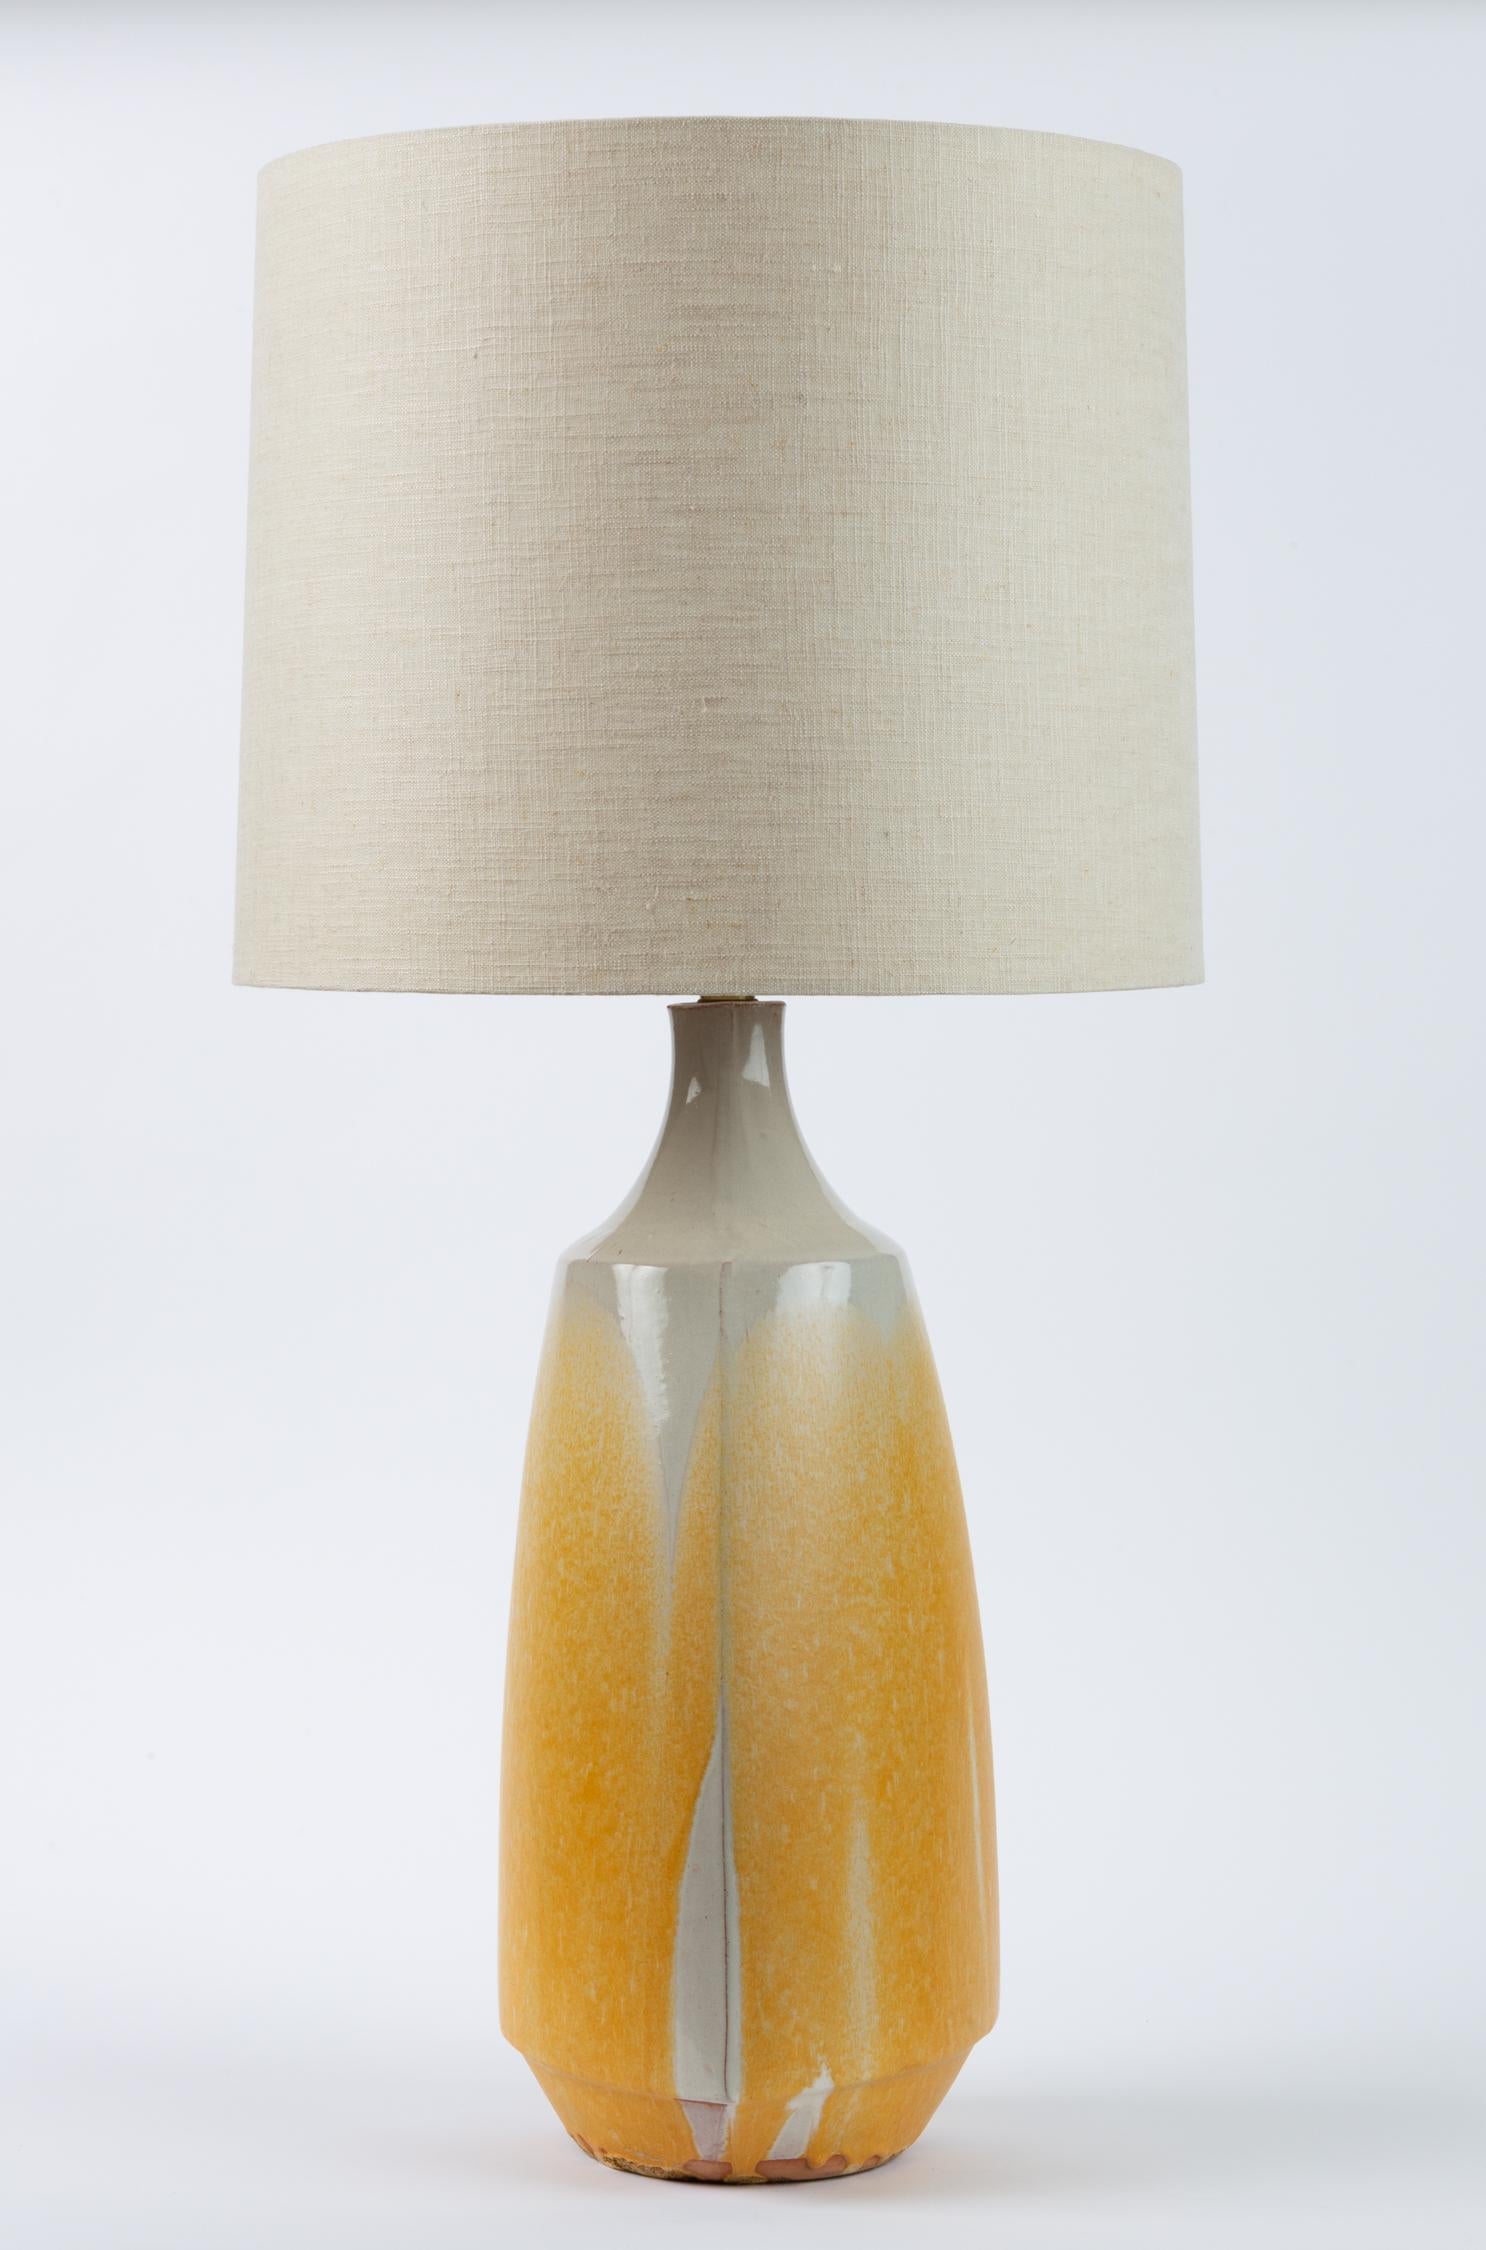 Statement lighting by David Cressey in stoneware with three sloping sides and an angular foot. The Studio Pottery-influenced shape of the lamp is emphasized by a white coating of drip glaze, leaving some exposed stoneware near the bottom of the